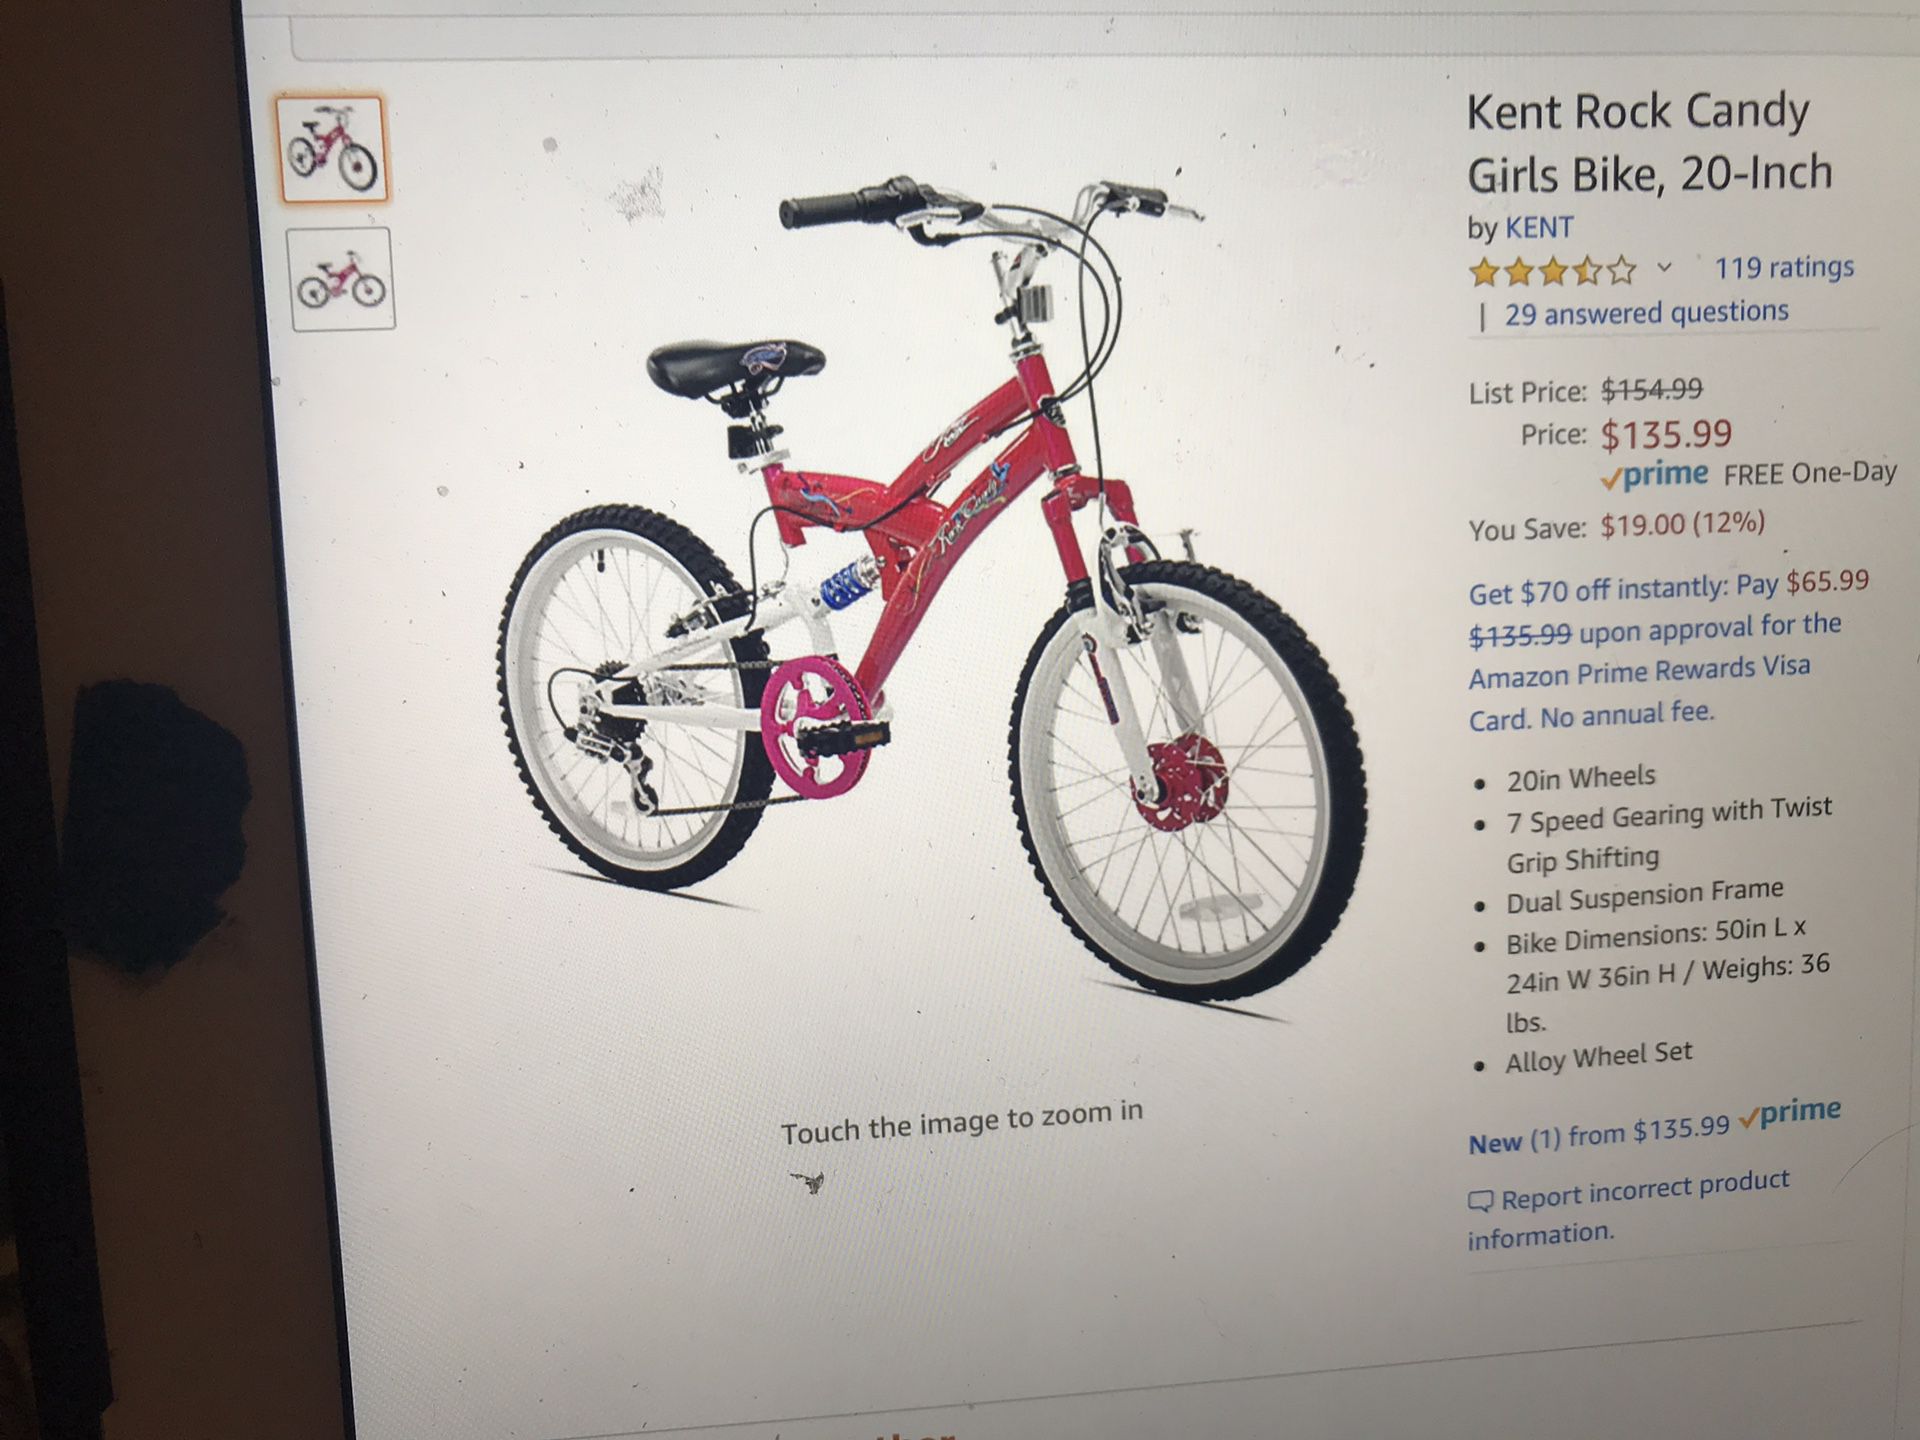 Kent Rock Candy Girls Bike W/ a Thorn Proof Airless Tires